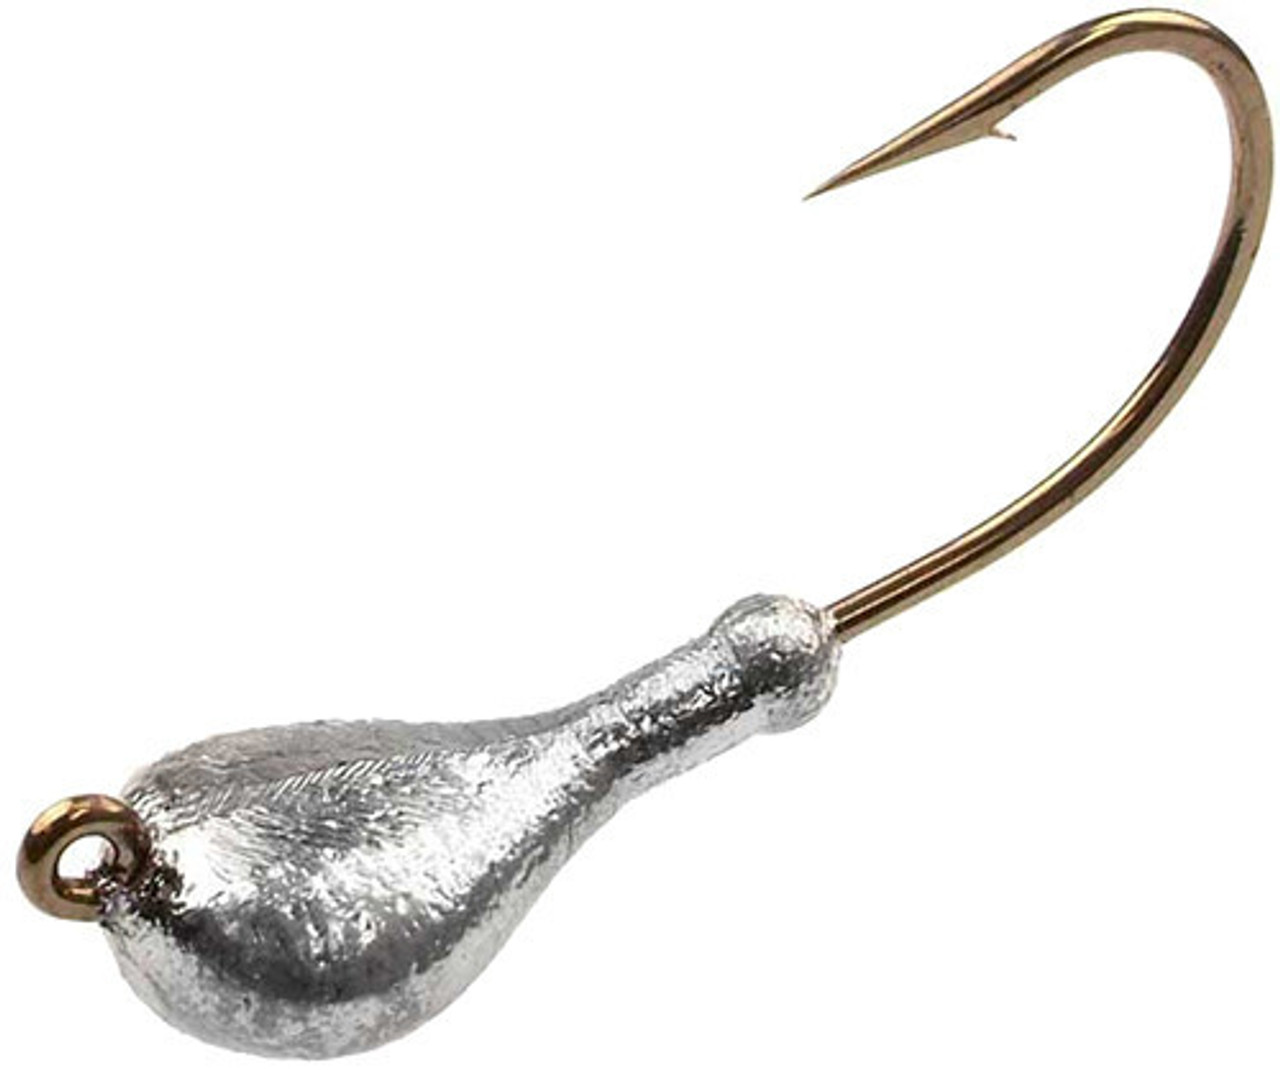 Do-It Sparkie Jig Molds - Barlow's Tackle